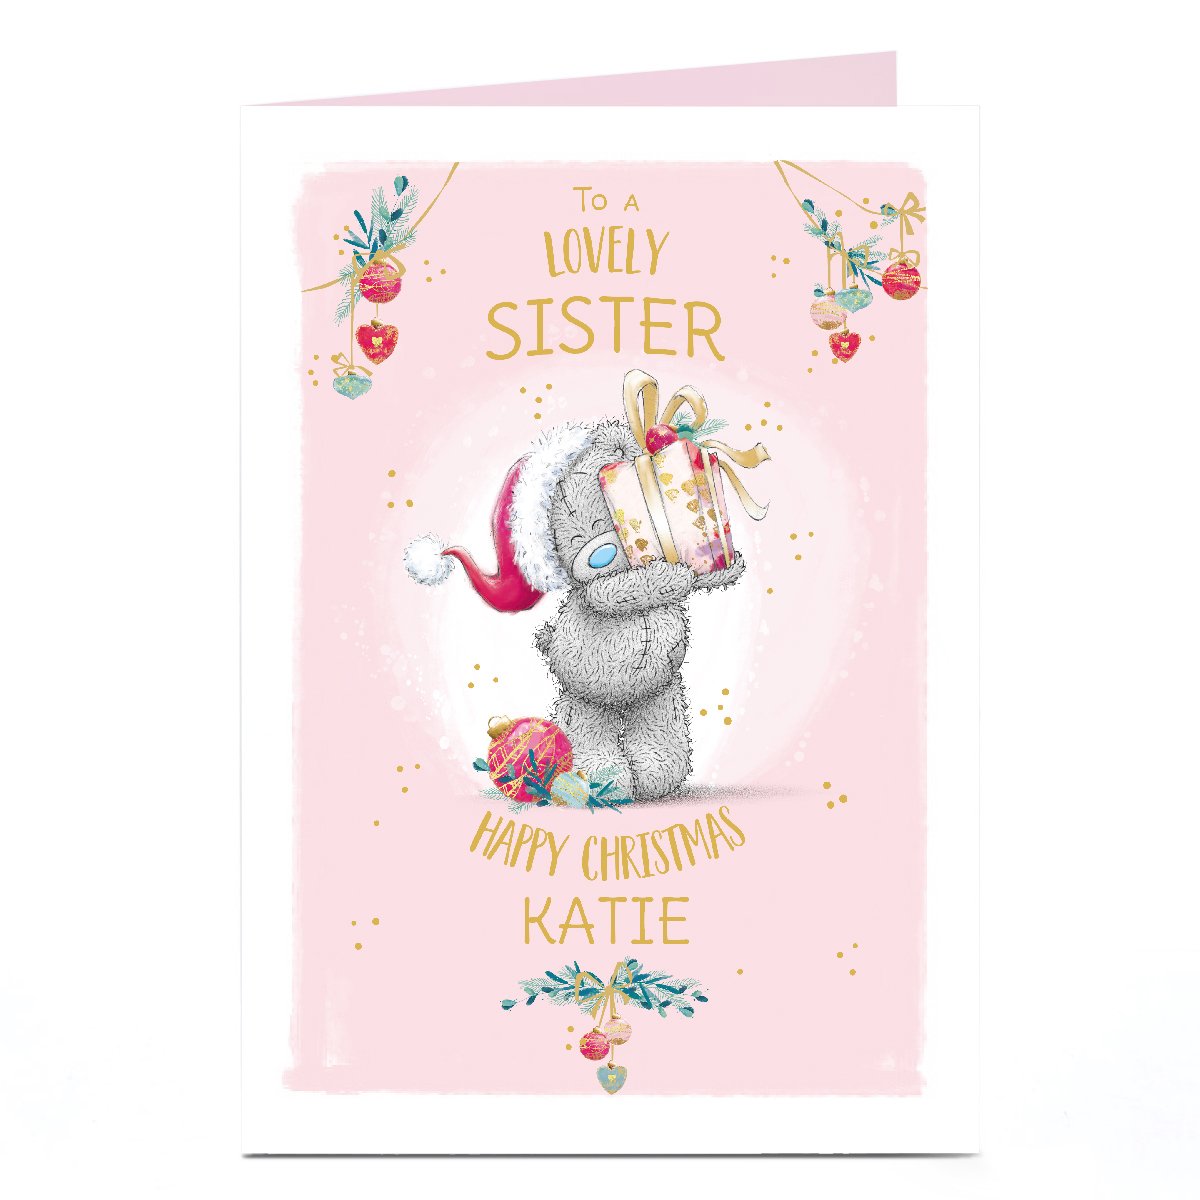 Personalised Tatty Teddy Christmas Card - To a Lovely Sister